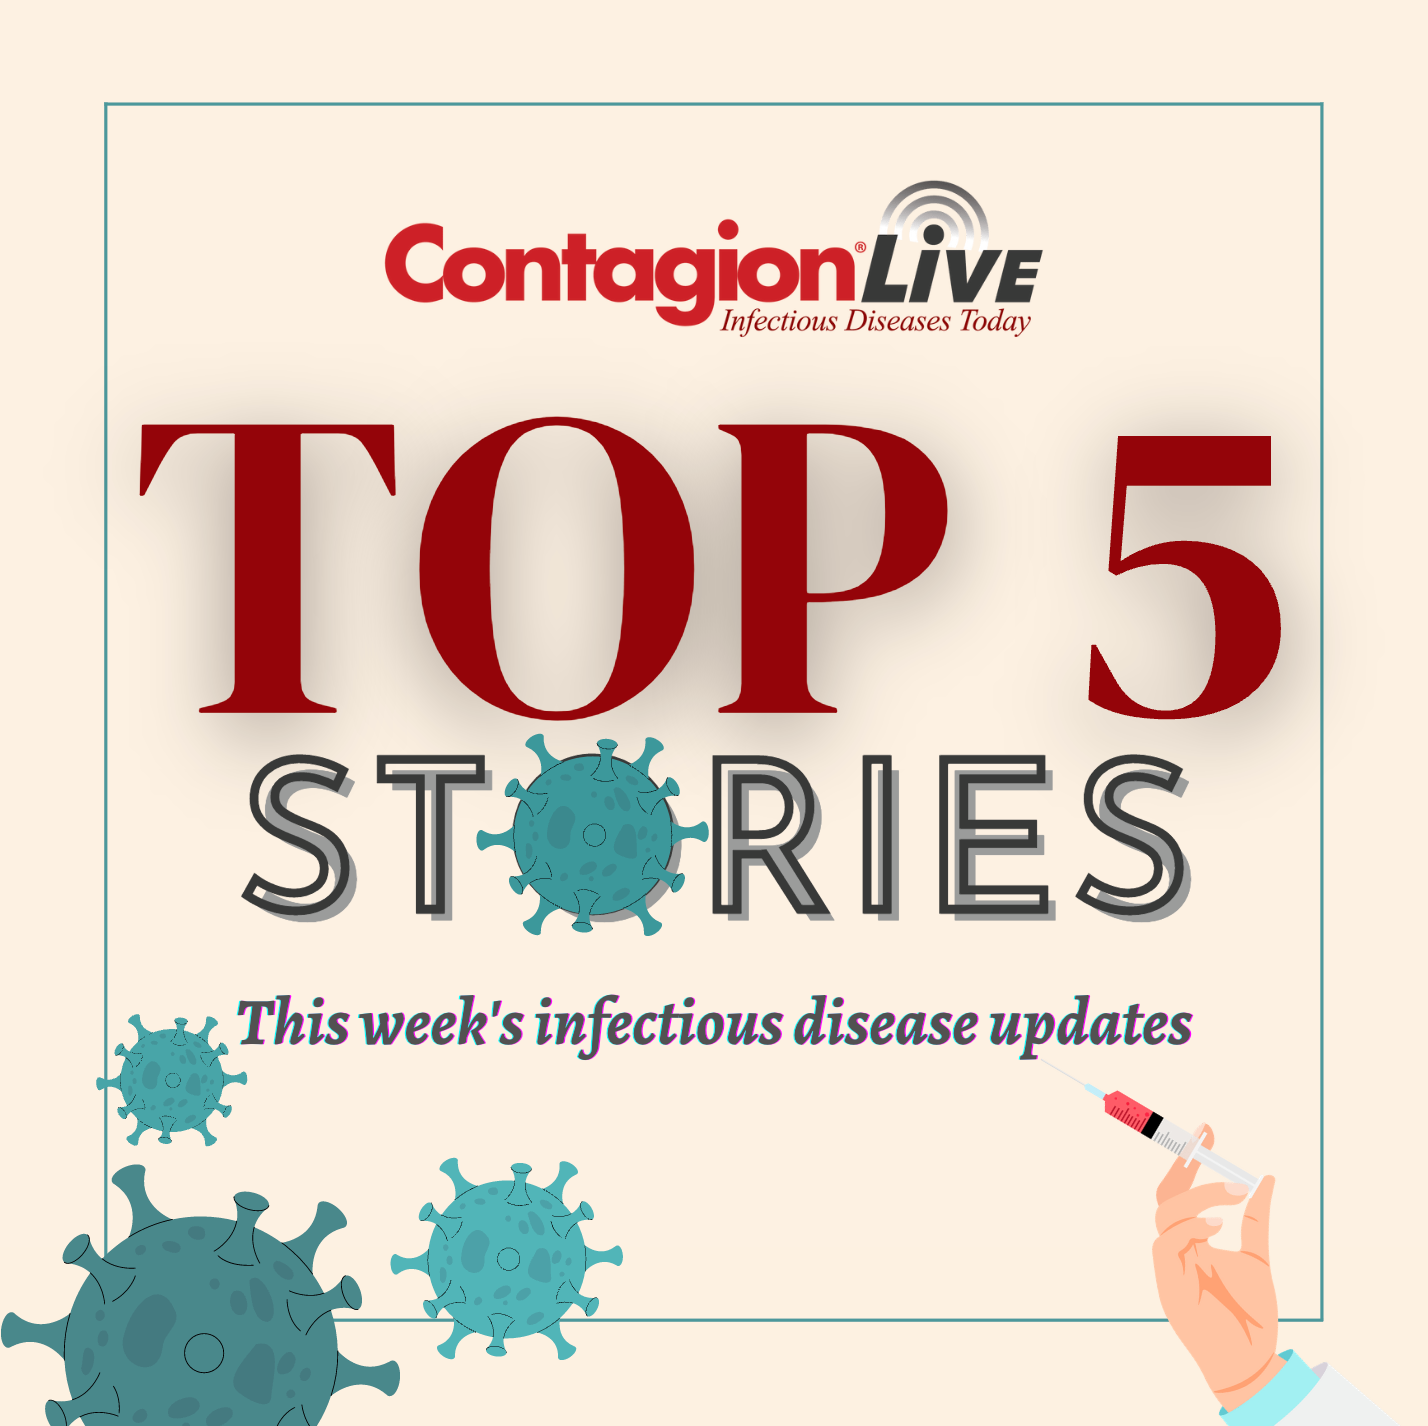 From the concerning rise of Salmonella infections to the anticipated FDA approvals of groundbreaking treatments, this digest provides a snapshot of the most important news and developments shaping the healthcare landscape.  Stay informed with this concise summary of the week's most significant stories.